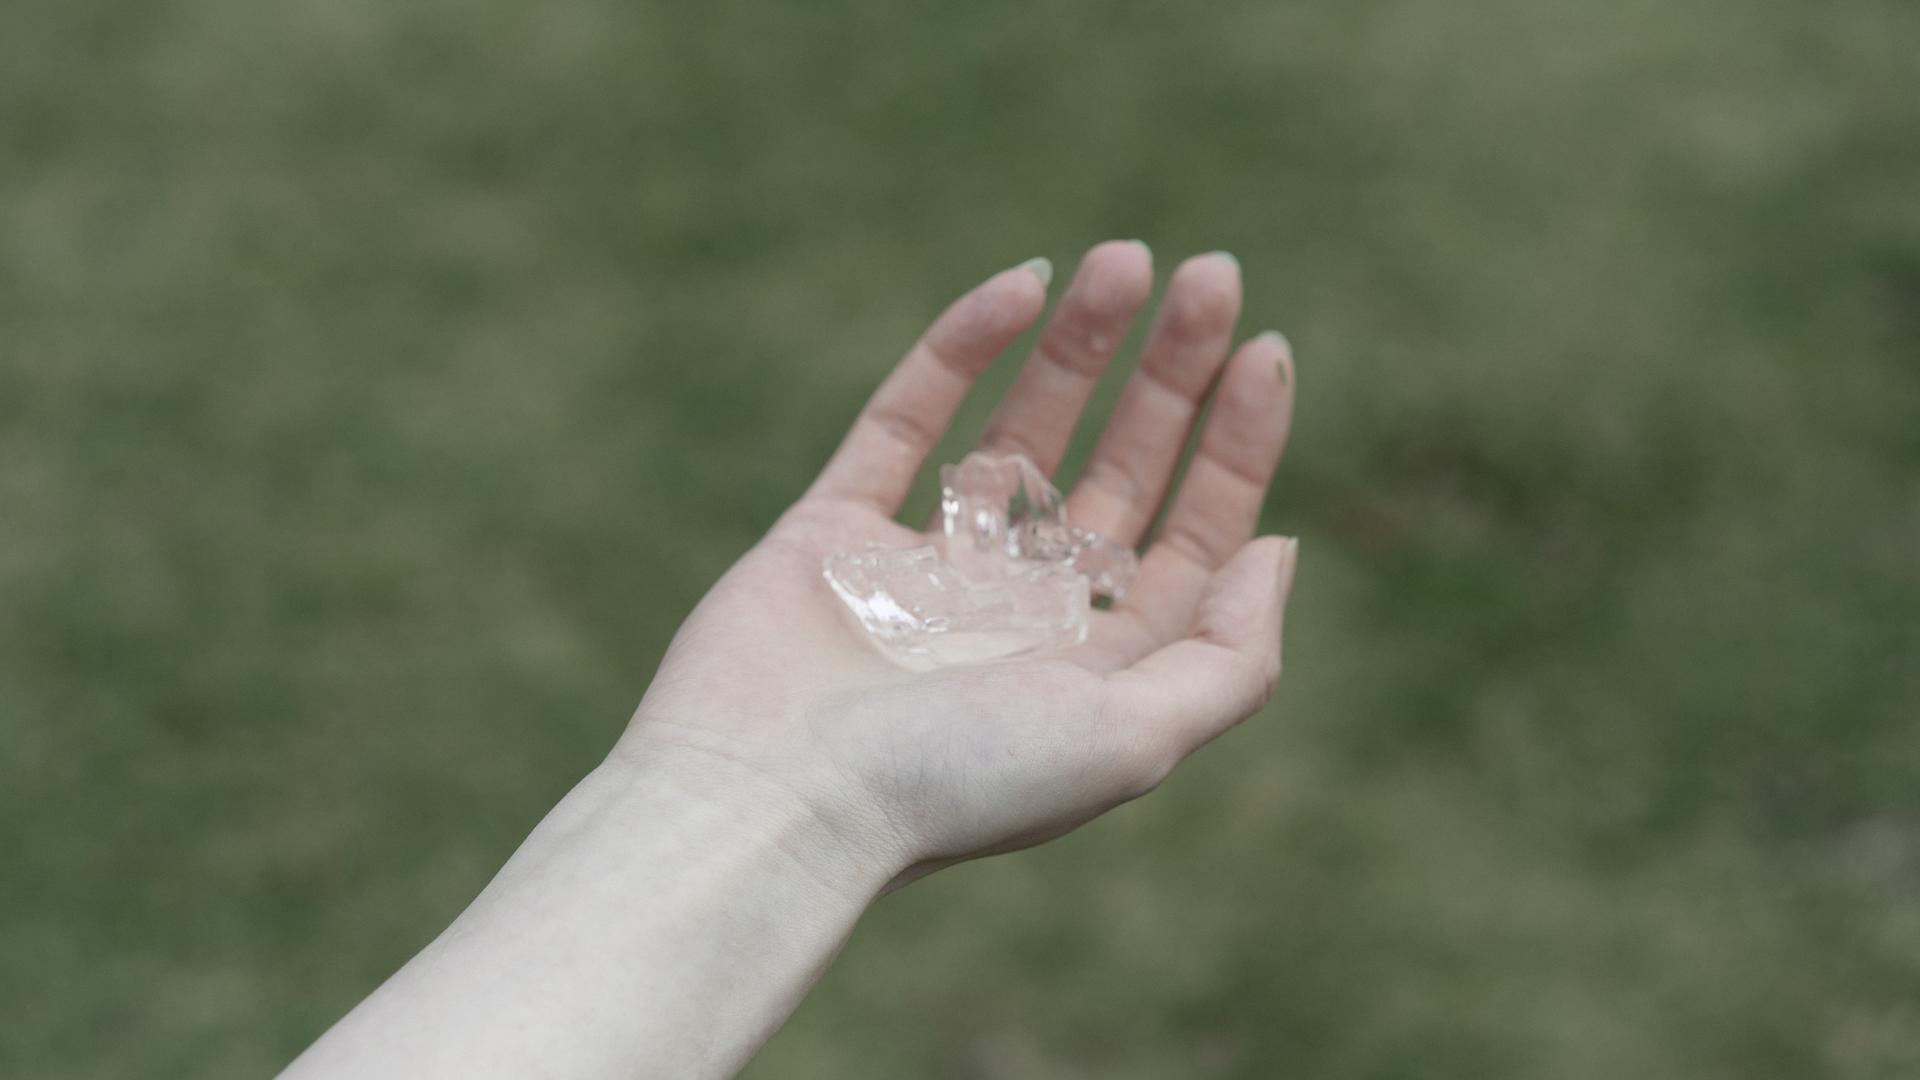 One hand holding a fragment of an ice lens.